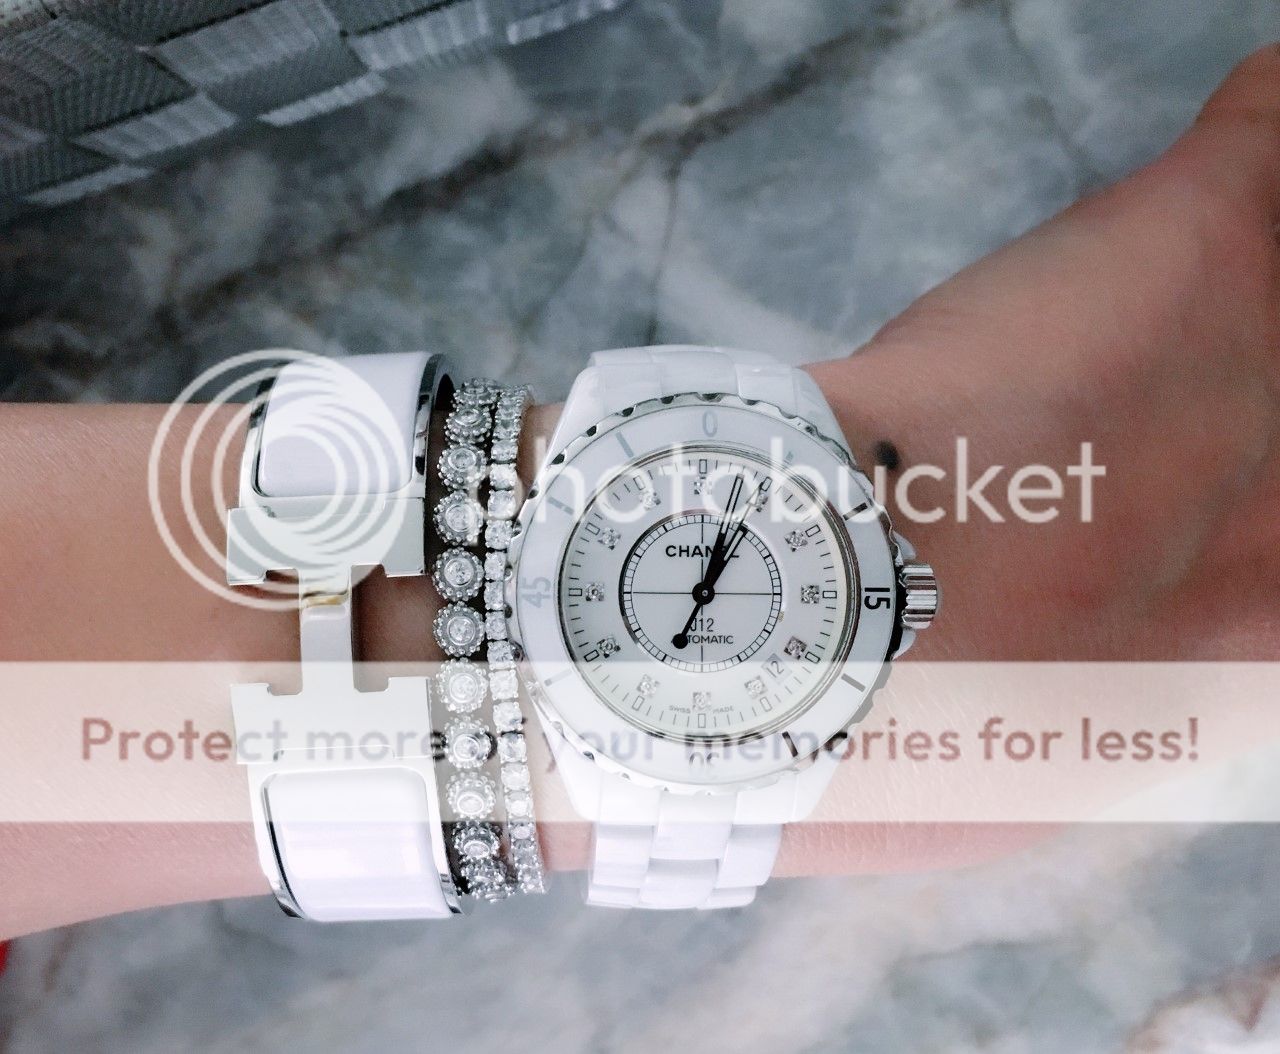 Used Chanel J12 Watch - 31 For Sale on 1stDibs